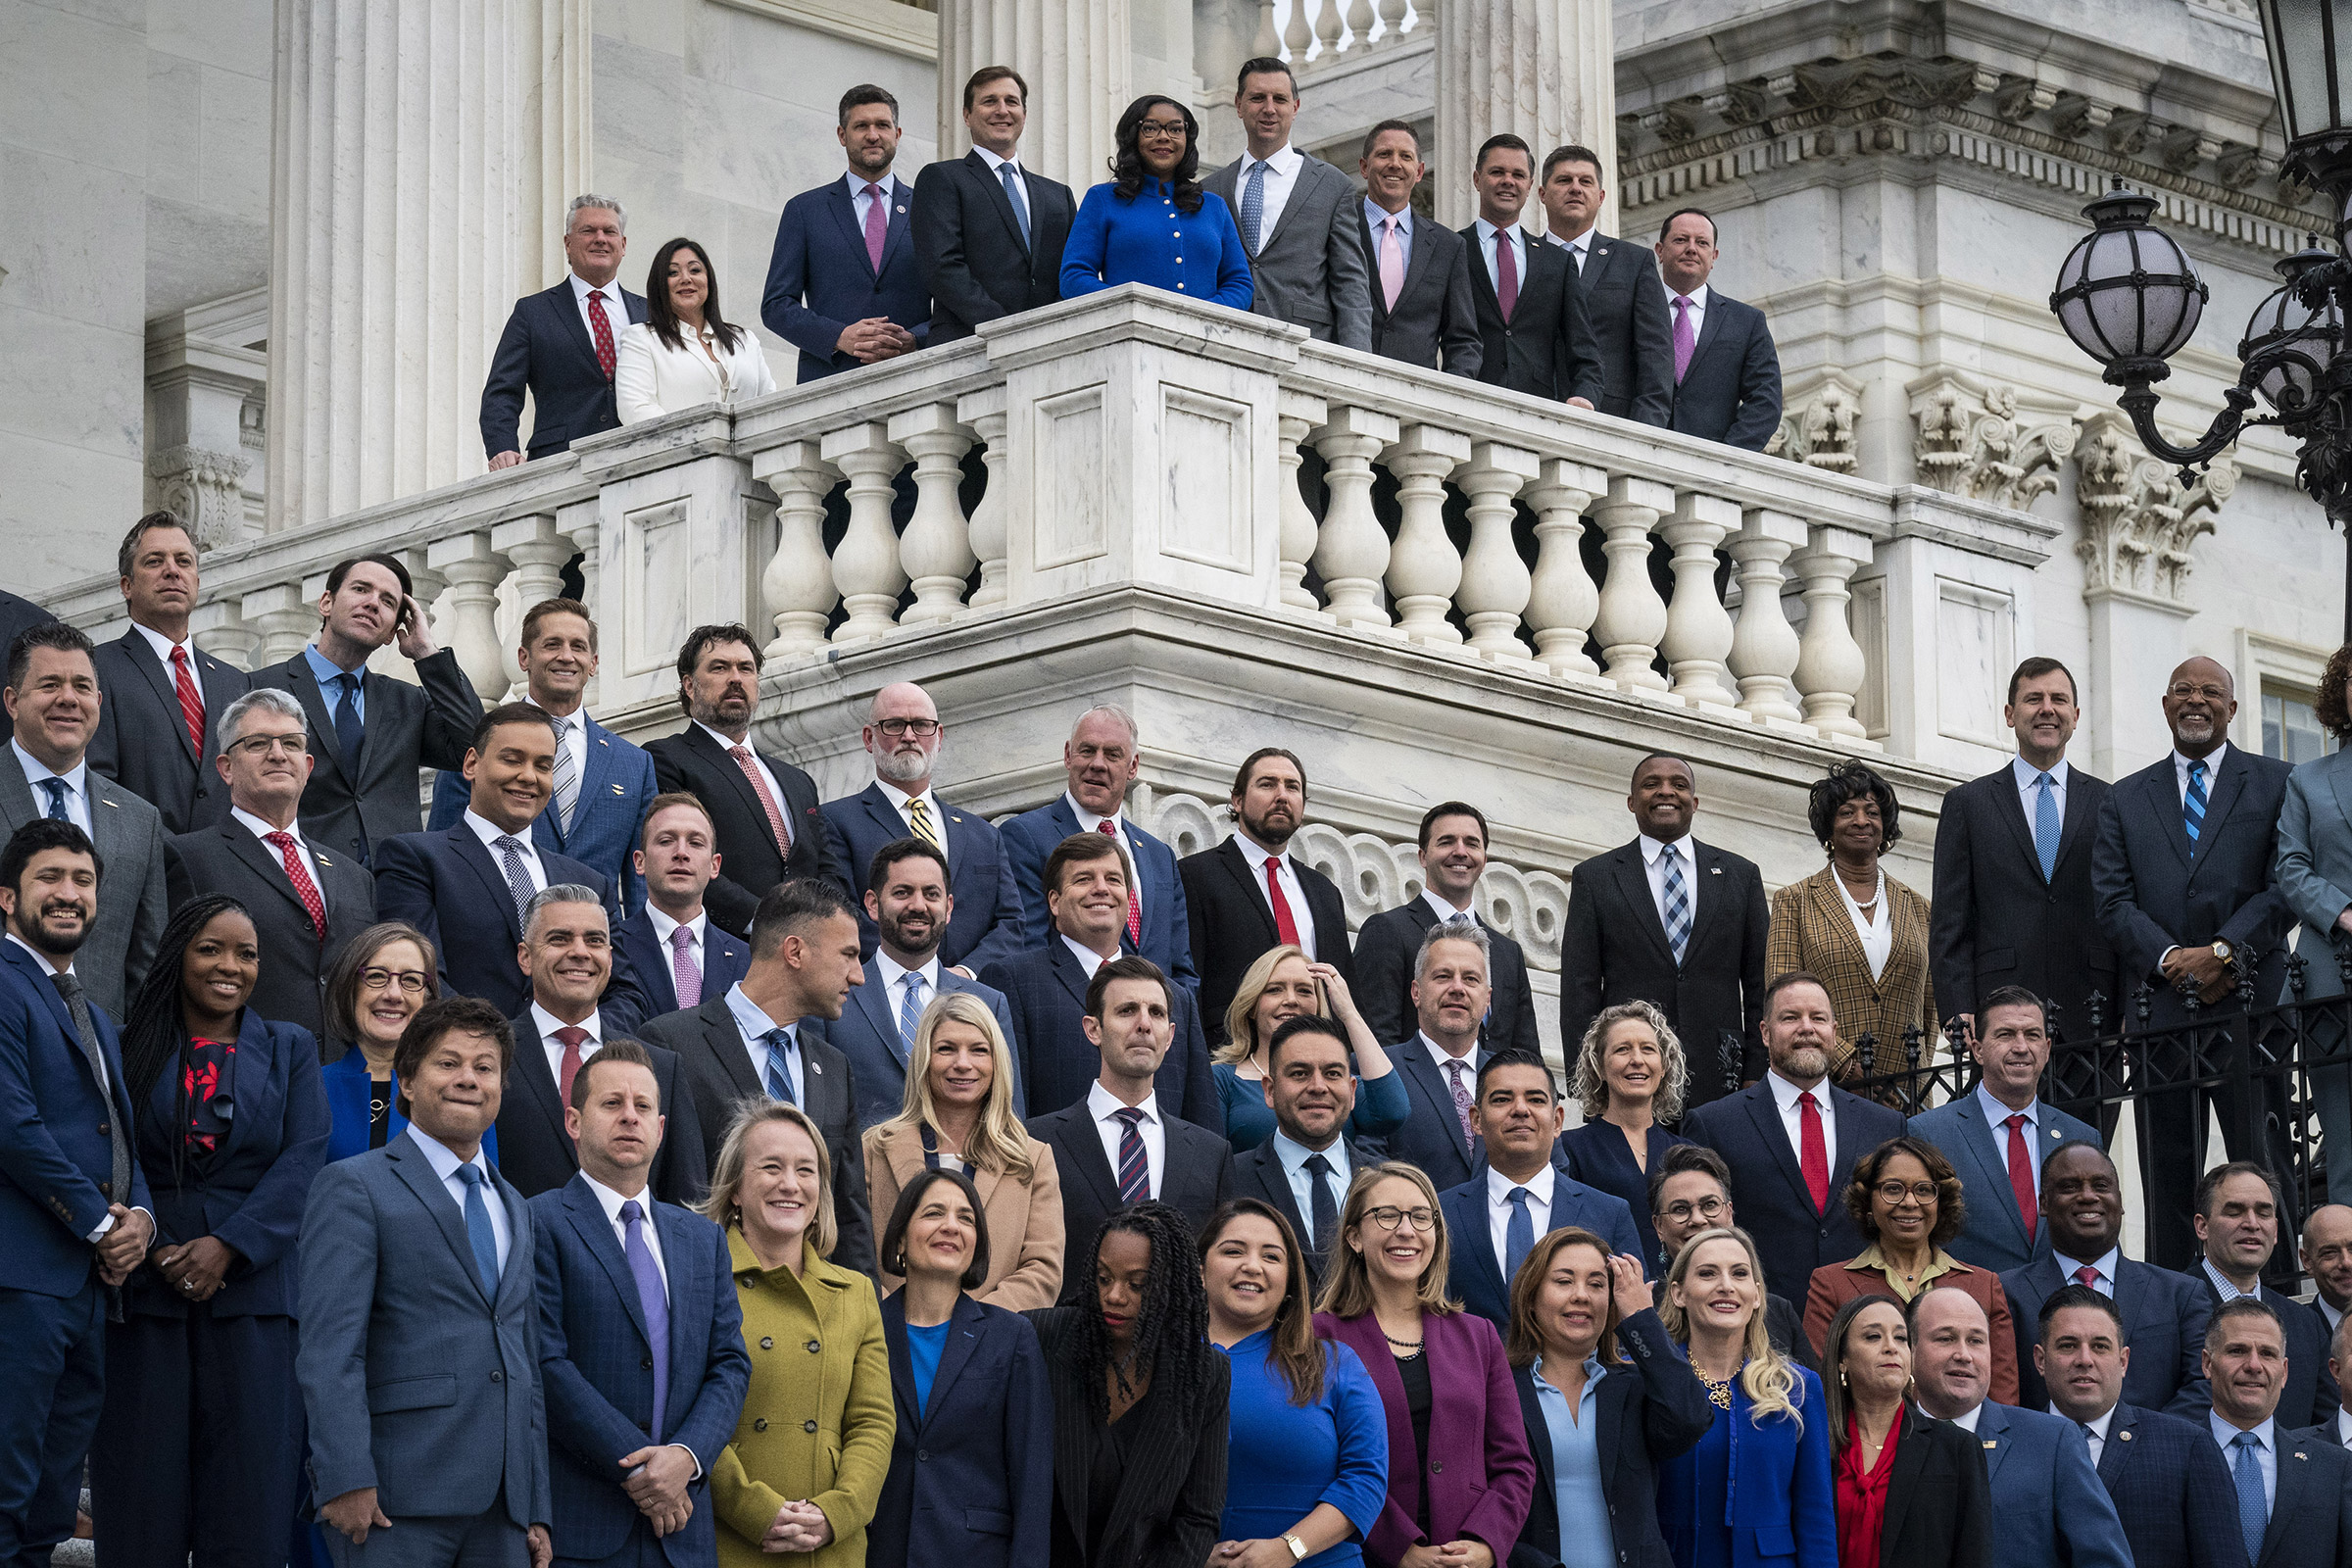 Newly-elected members of the 118th Congress pose for a class photo on Capitol Hill in Washington, D.C., on Nov. 15, 2022. (Jabin Botsford—The Washington Post/Getty Images)